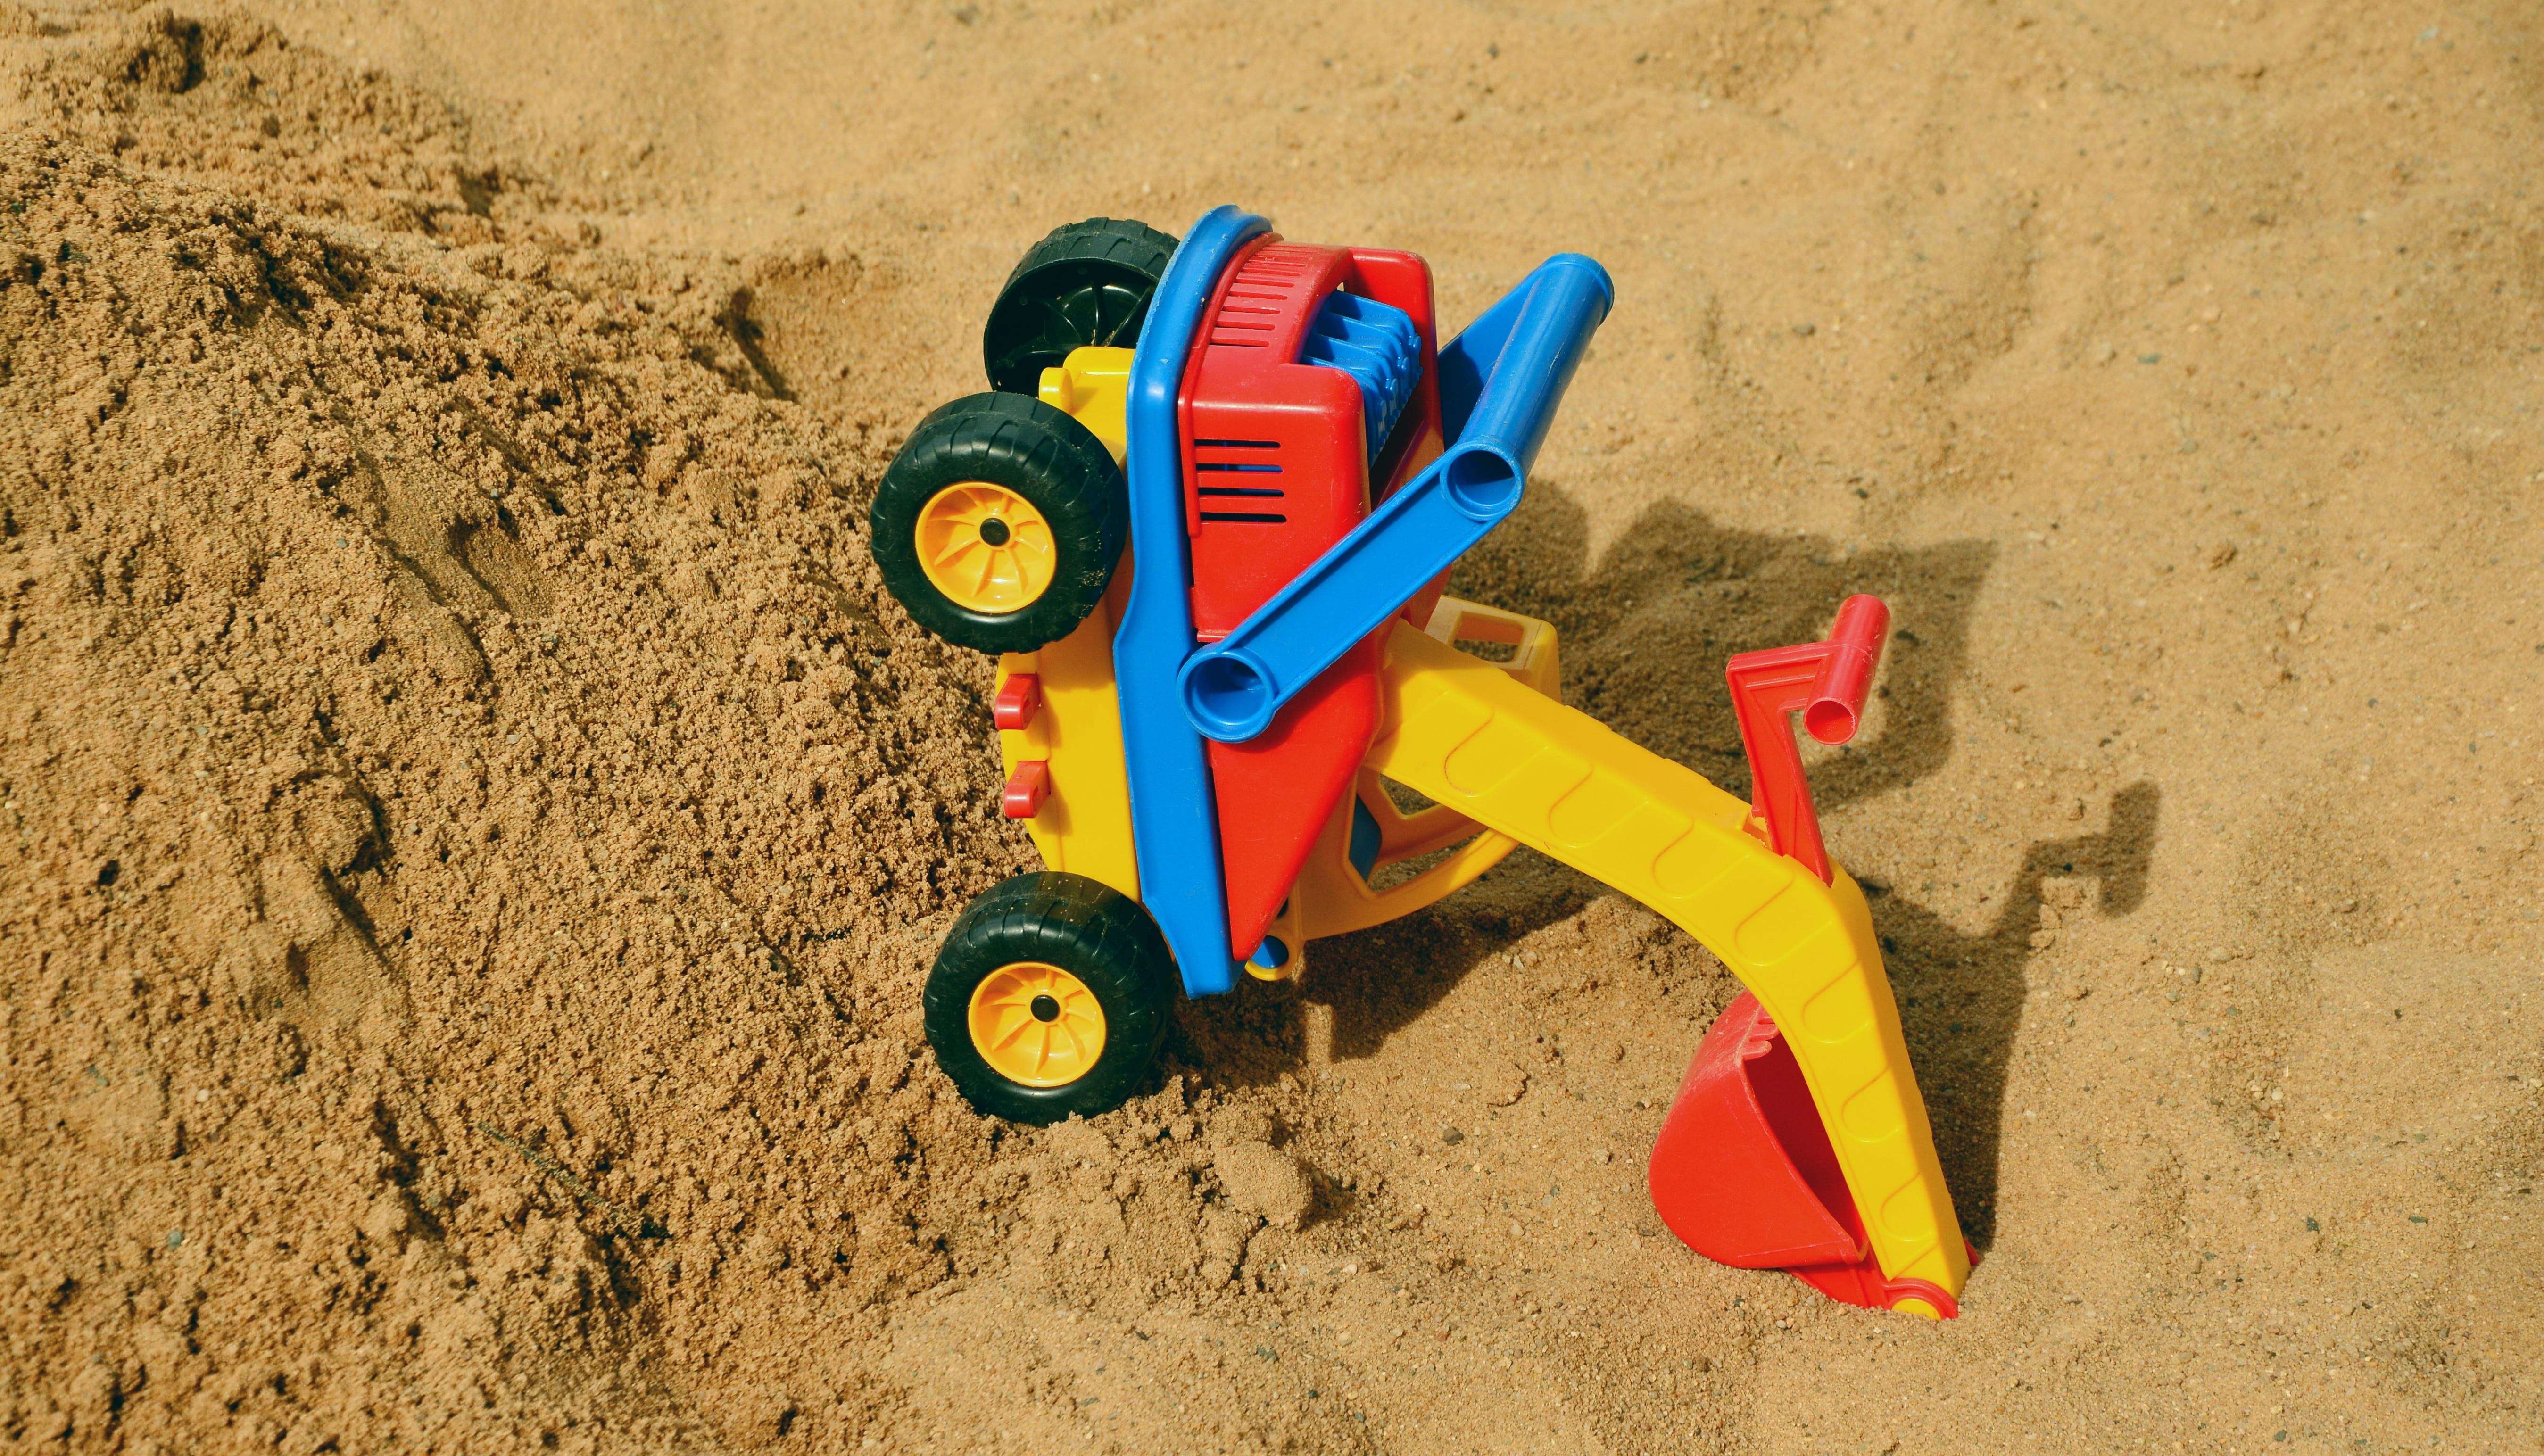 Sand, Toys, Excavators, Accident, sand toys, upset, accidents at work